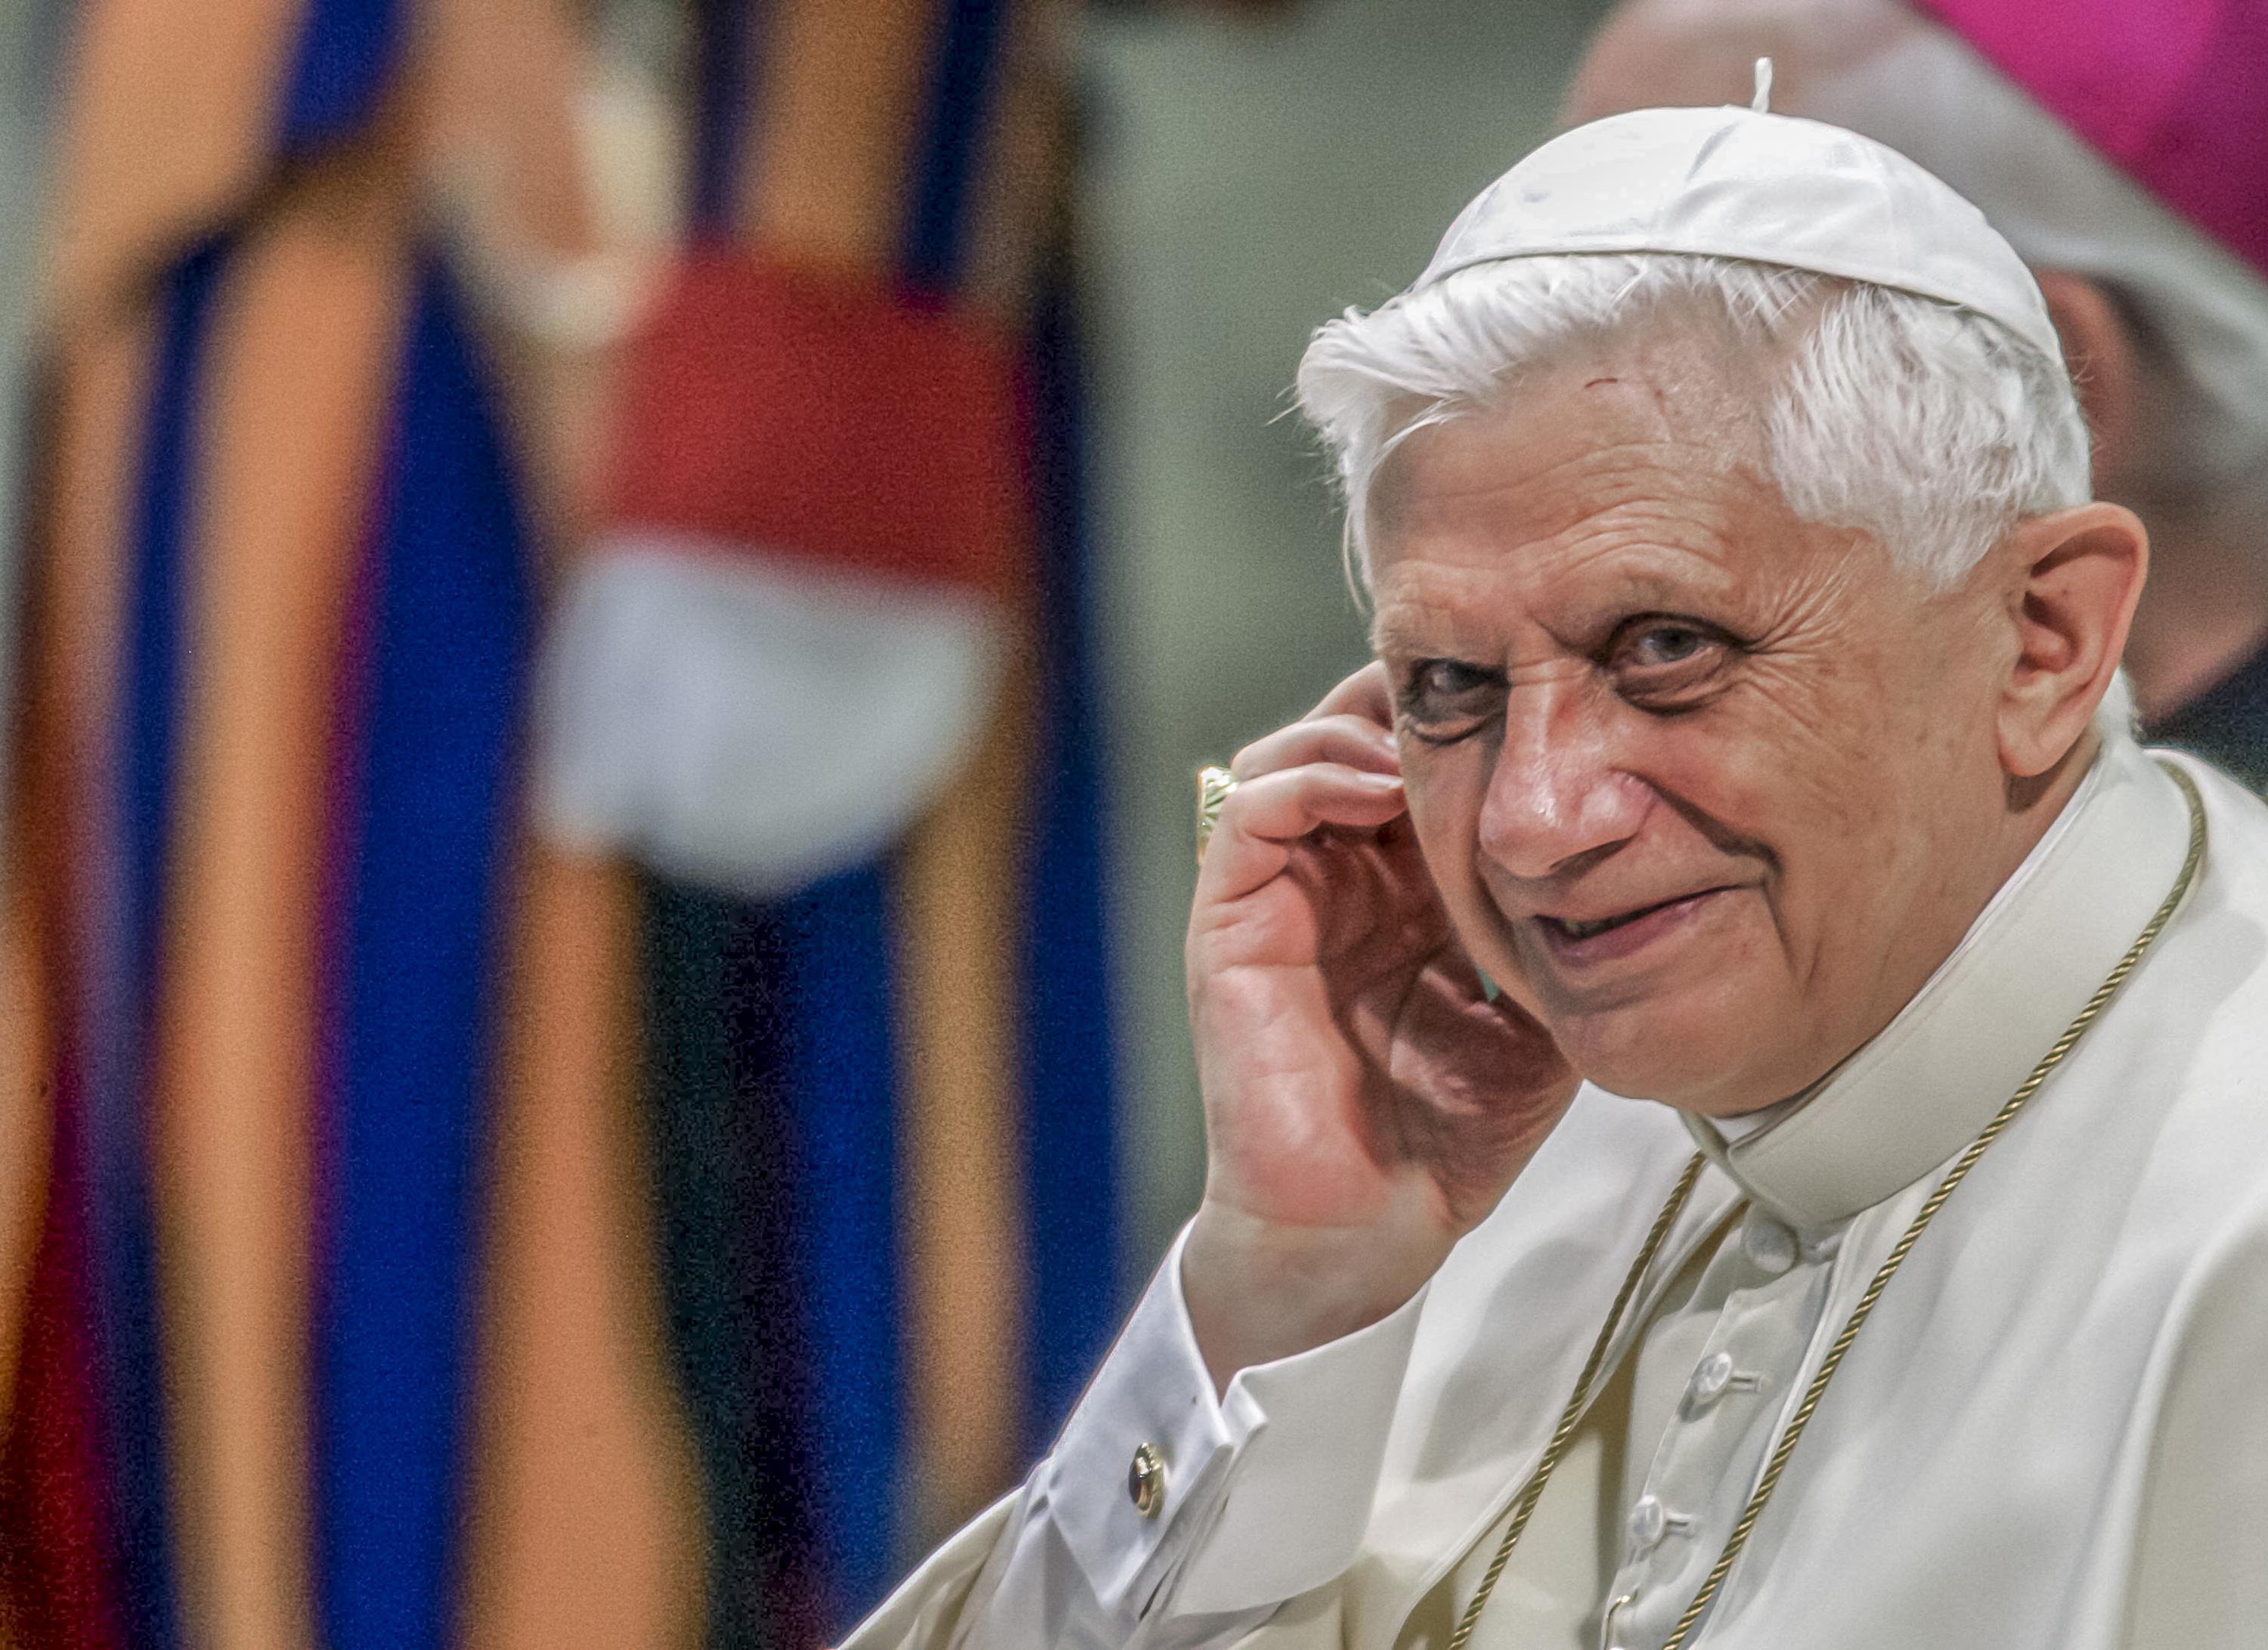 Benedict XVI, reluctant pope who chose to retire, dies at 95 AP News